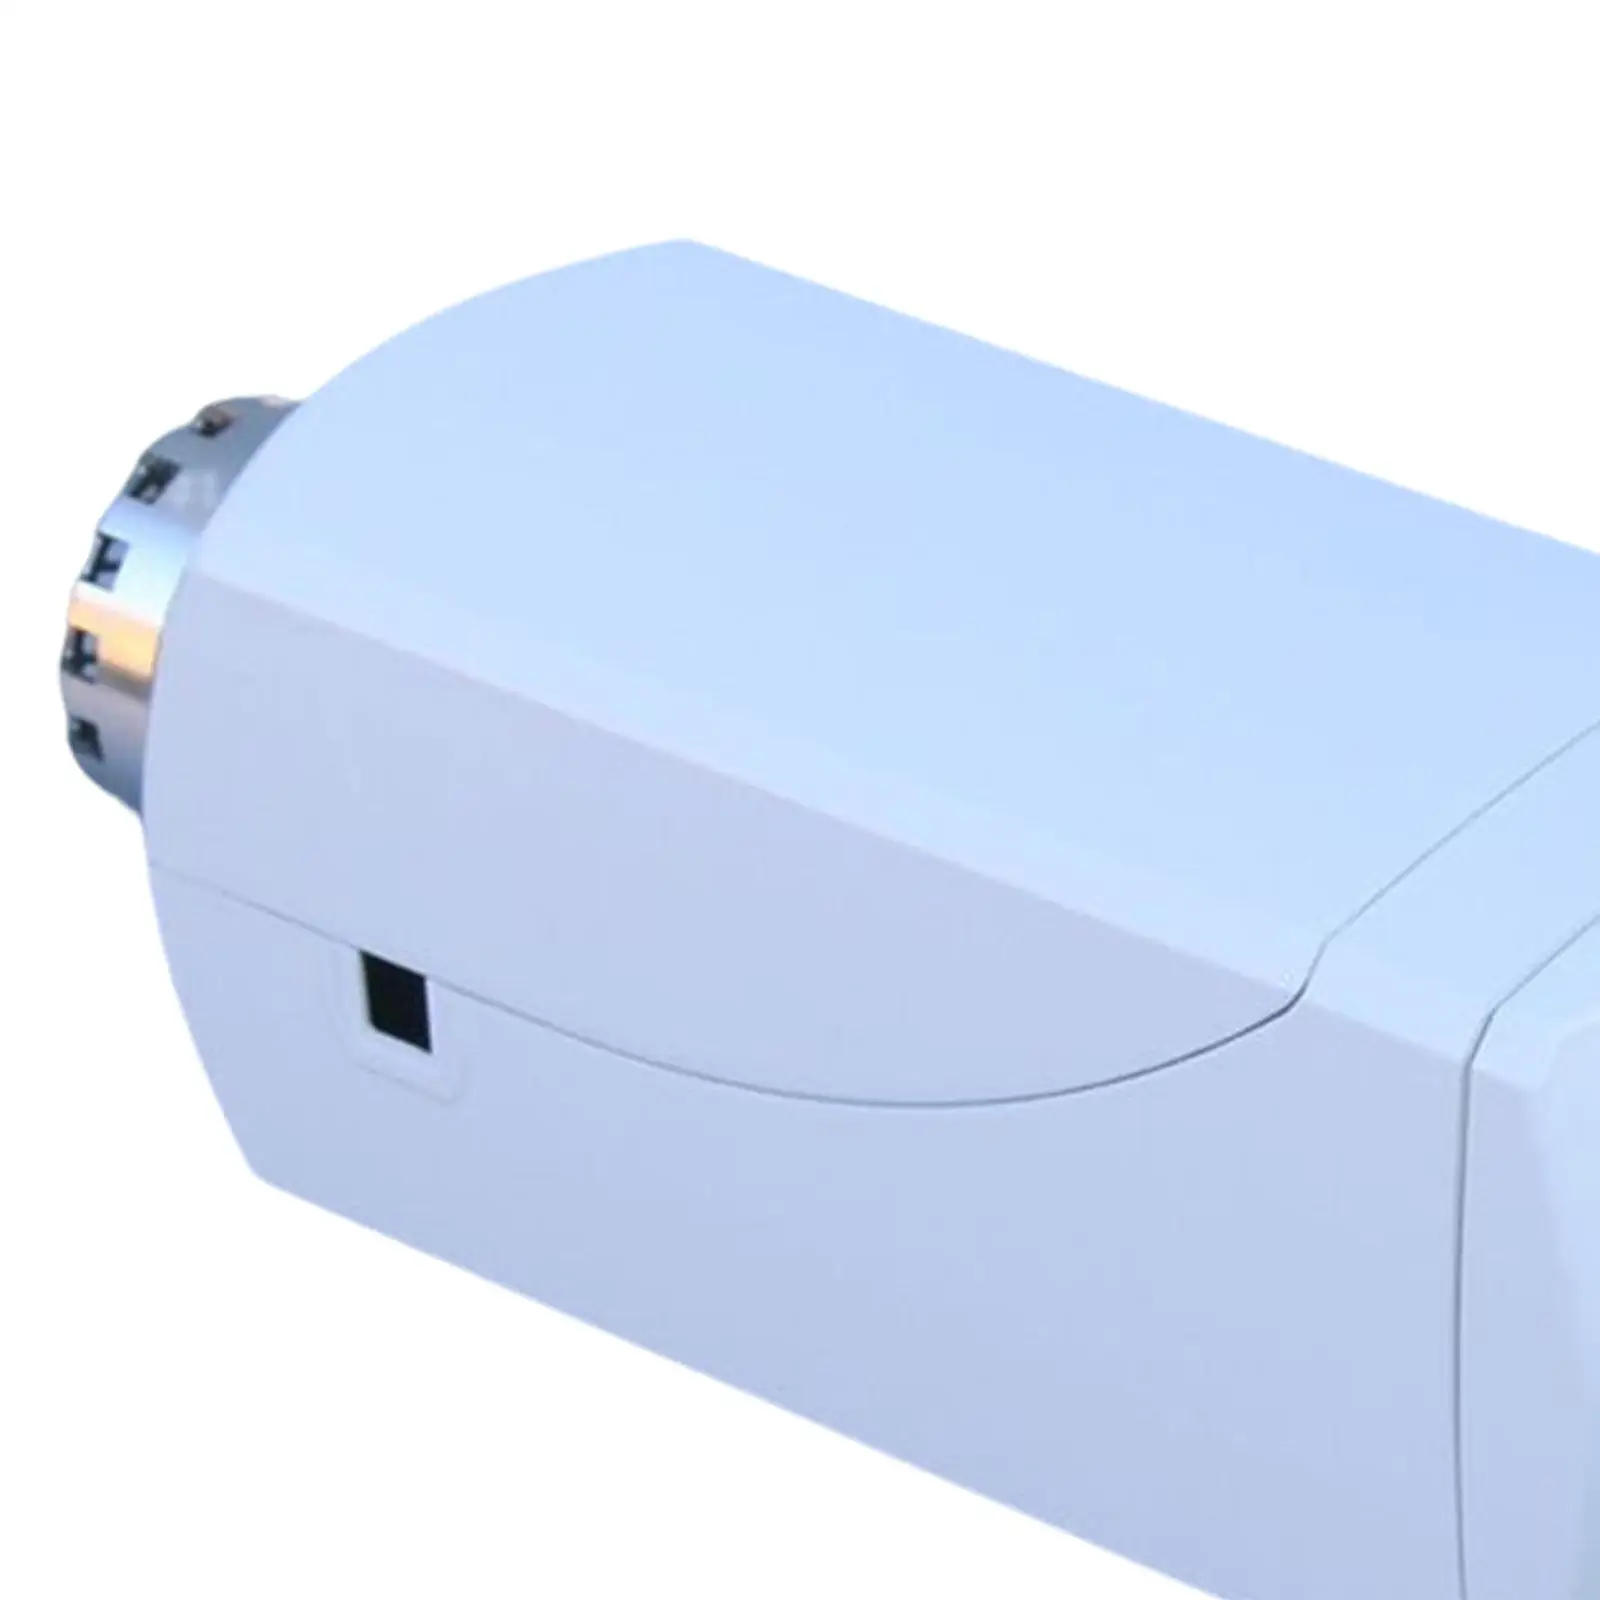 Car Parking Heater Four Hole Shell Aluminum Alloy Durable White Replace Parts Heating Accessories Flame Retardant